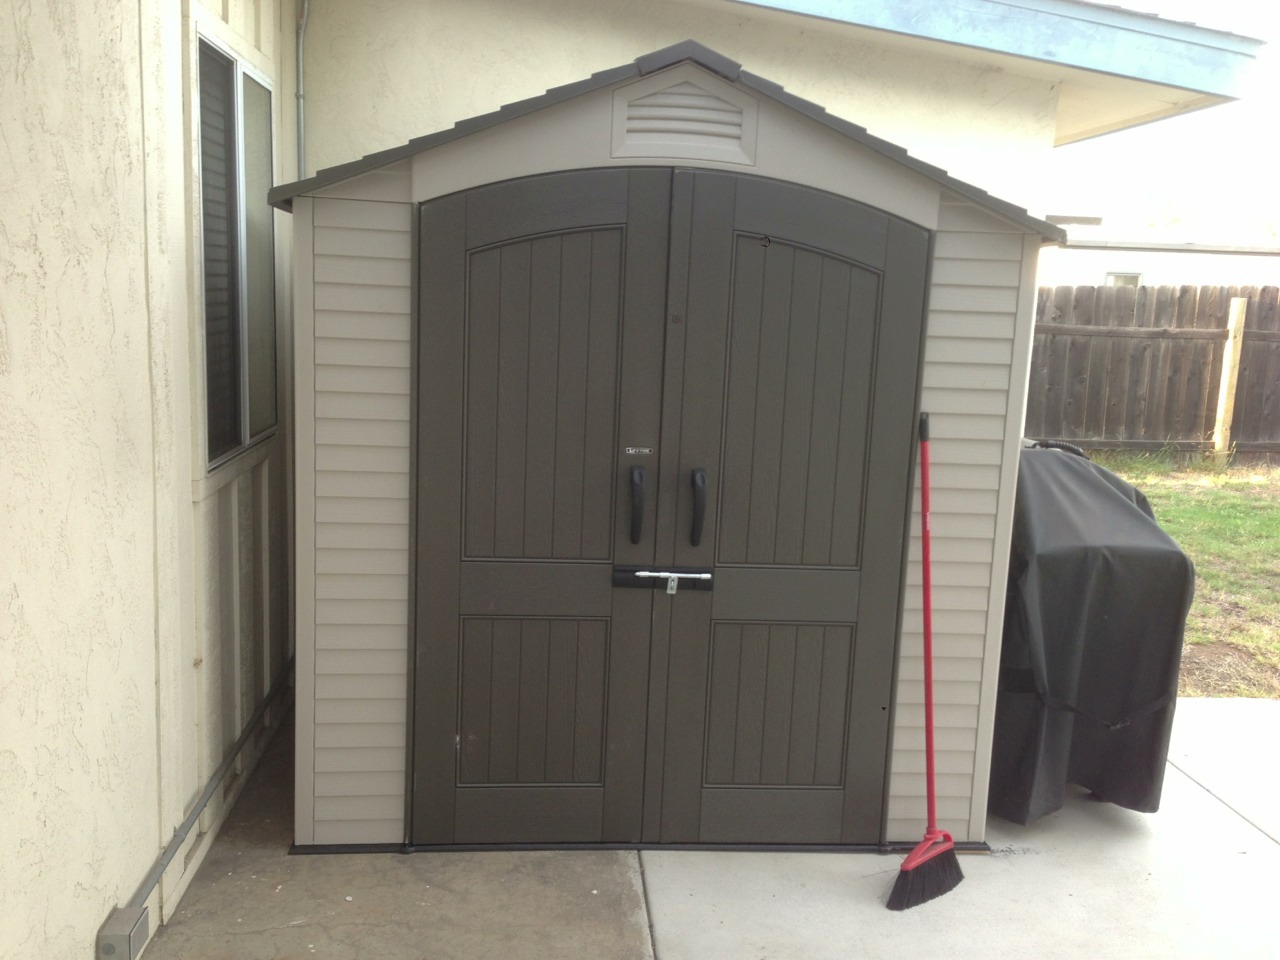 …and, 6 hours later, we have a shed.